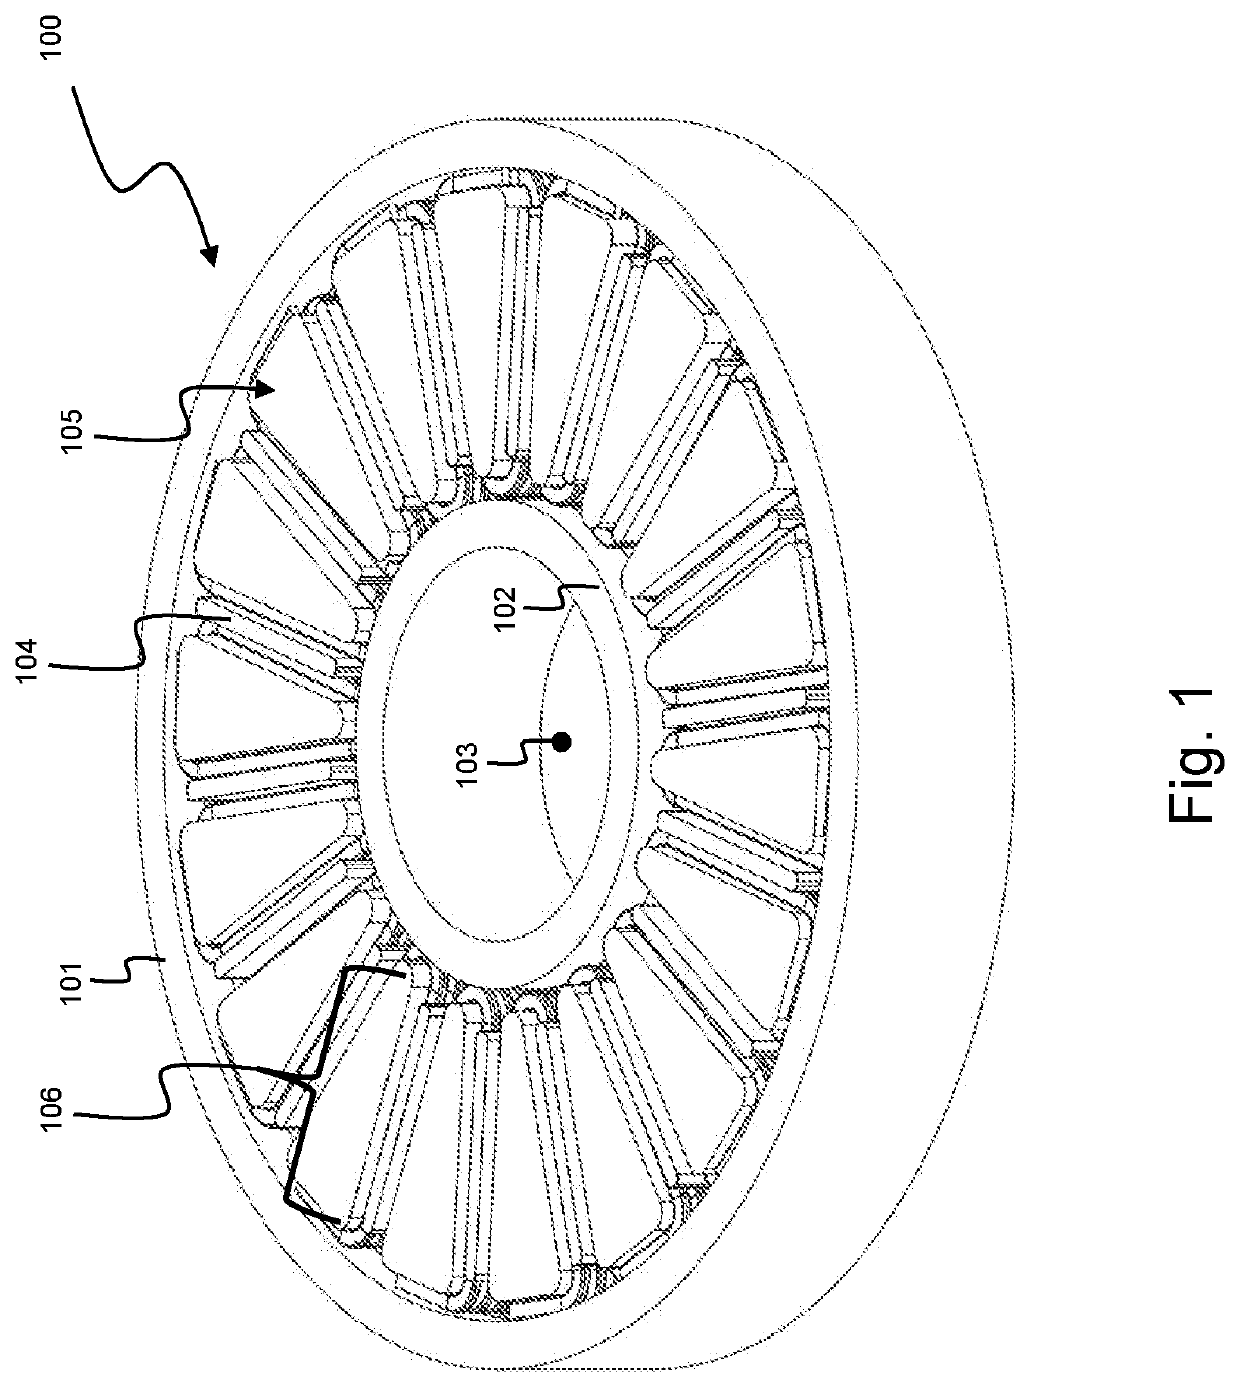 Cooling mechanism of a stator for an axial flux machine